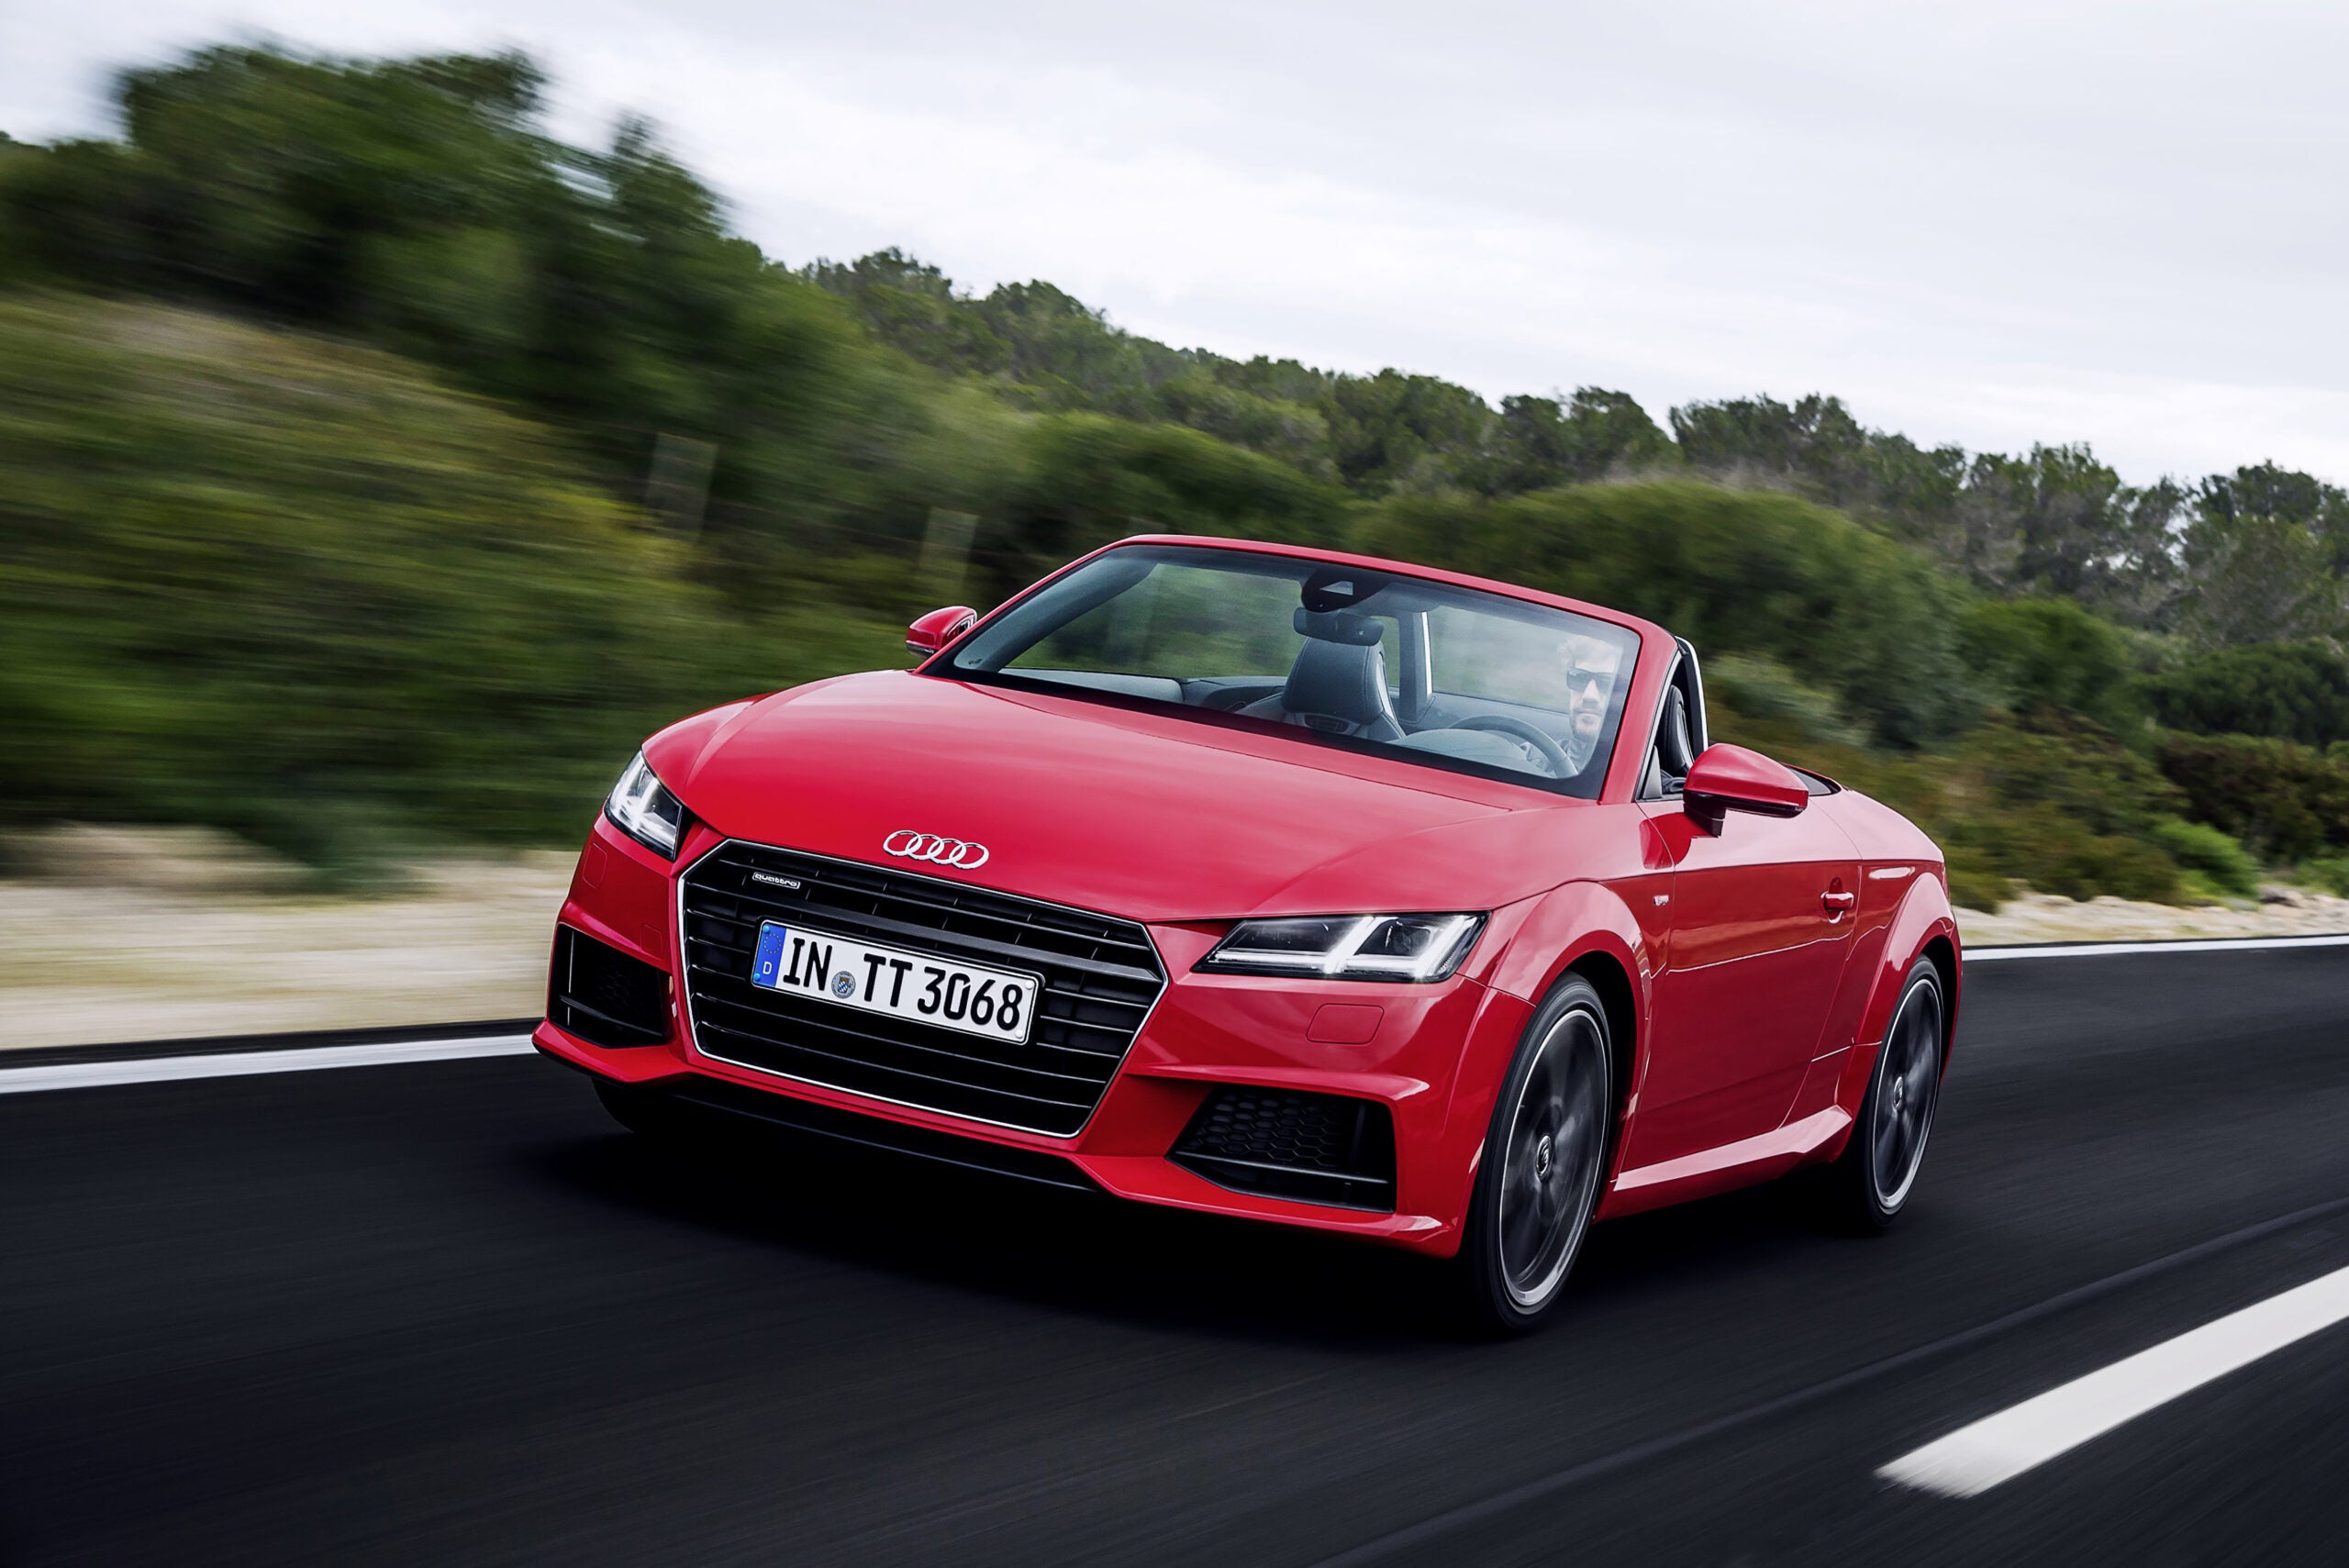 Review: Audi's TT Roadster designed for hot and cold weather